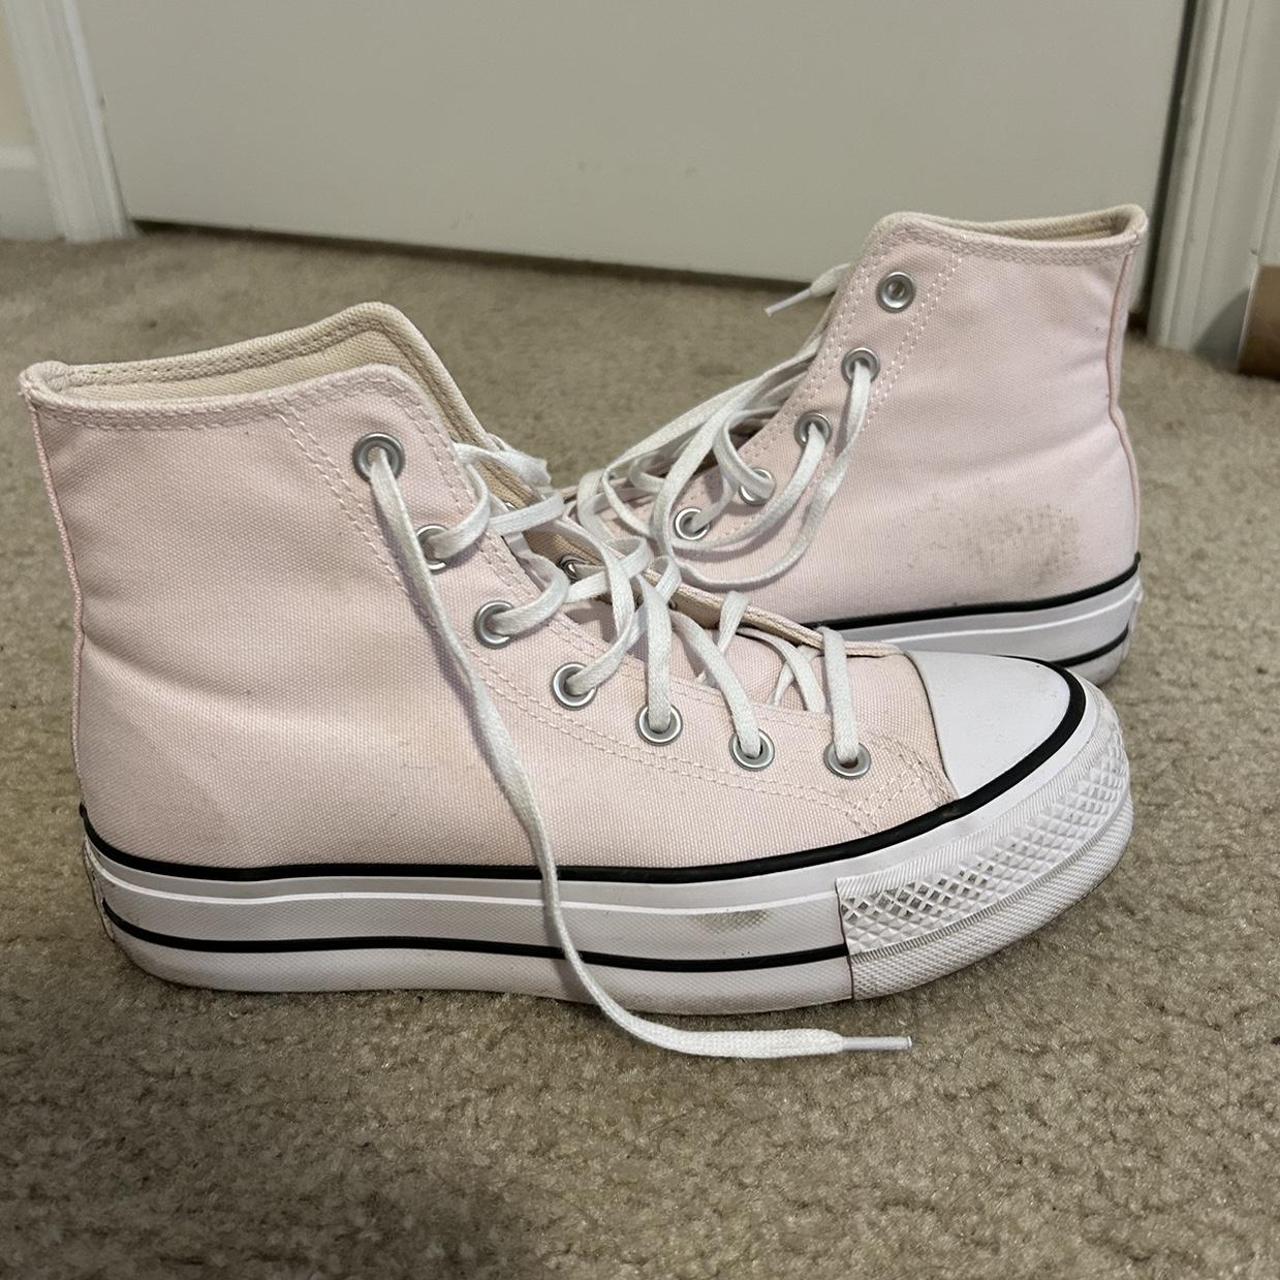 Converse Women's White and Pink Trainers | Depop